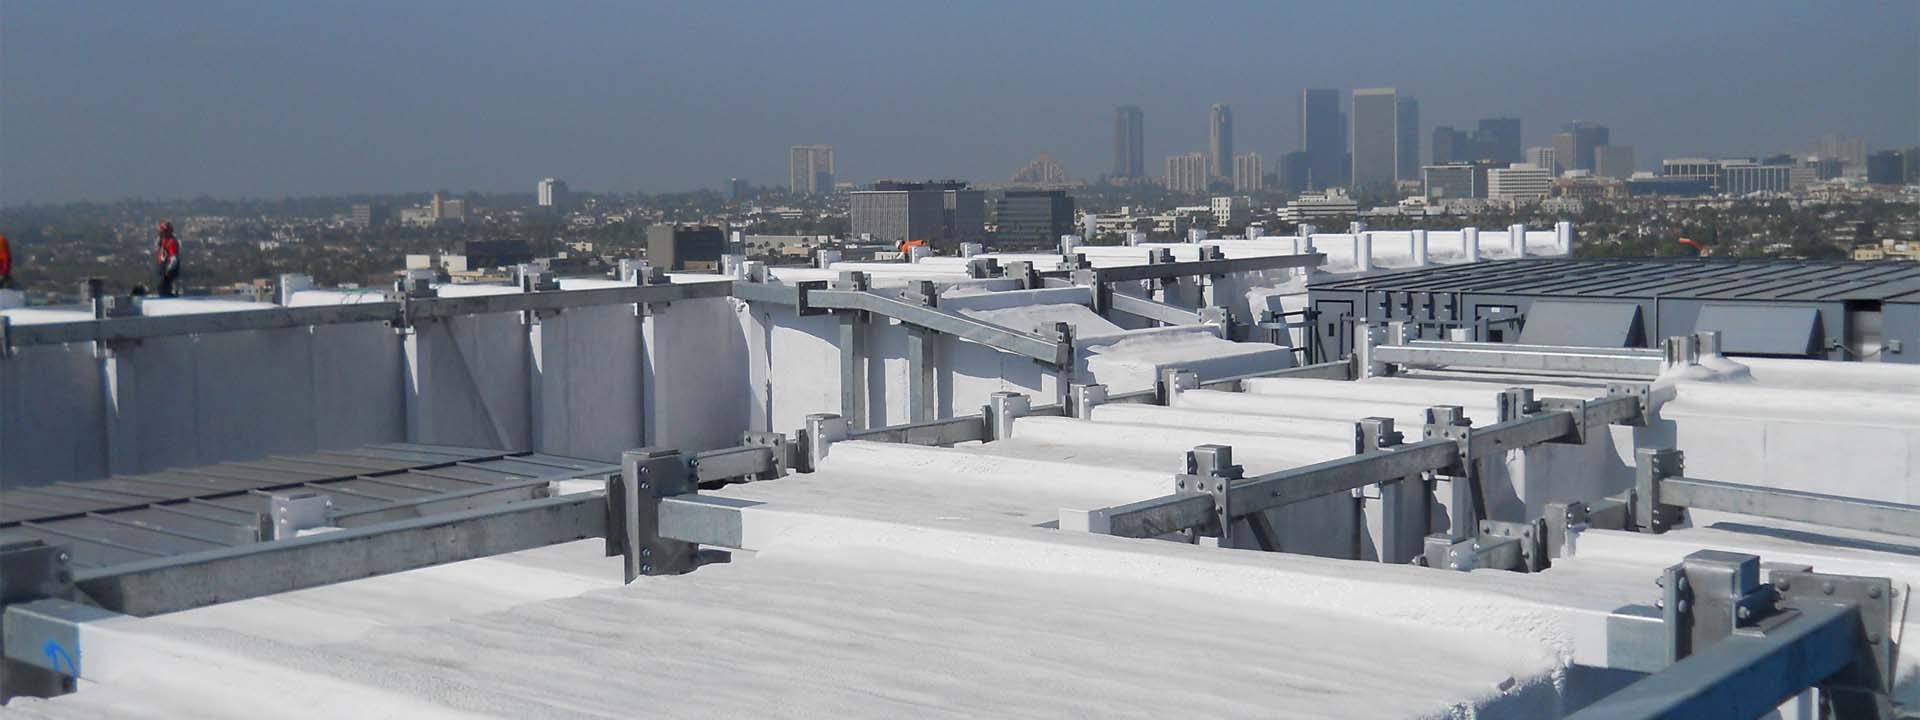 Hospitals & Medical Centers Commercial Roofing Contractor - Los Angeles